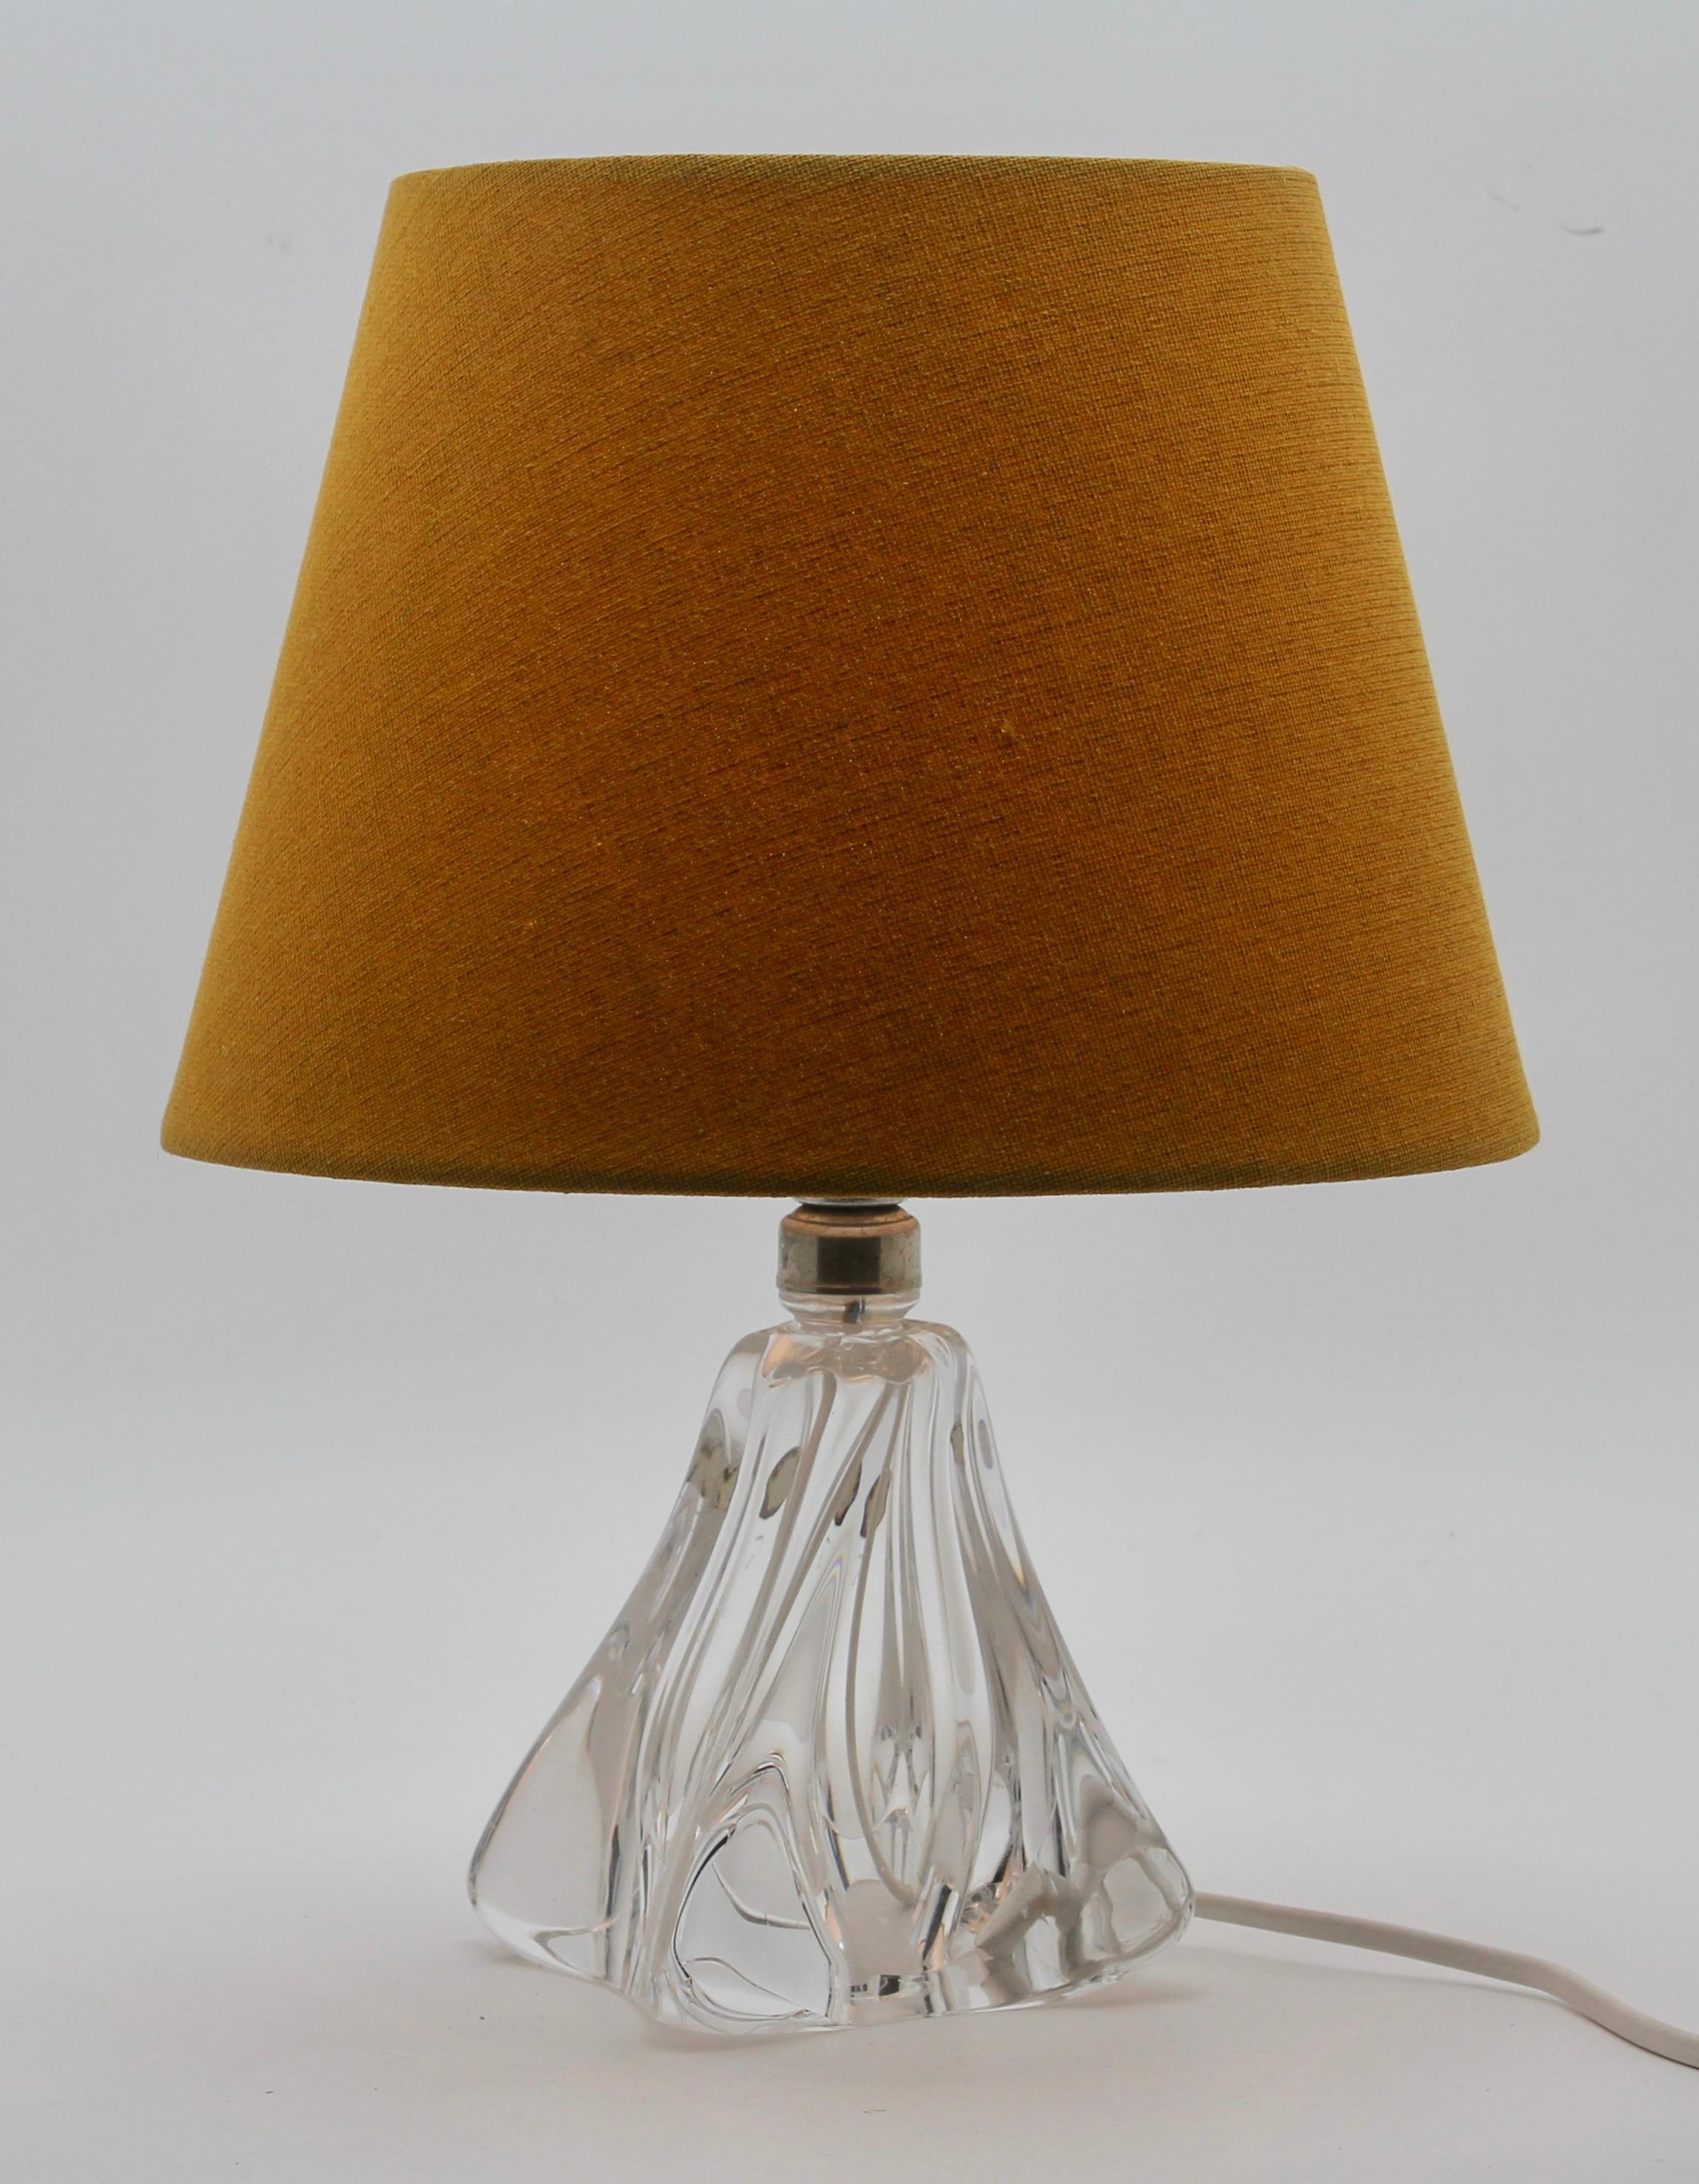 Val Saint Lambert Crystal Table Lamp, with Label, Excellent Condition (Handgefertigt)